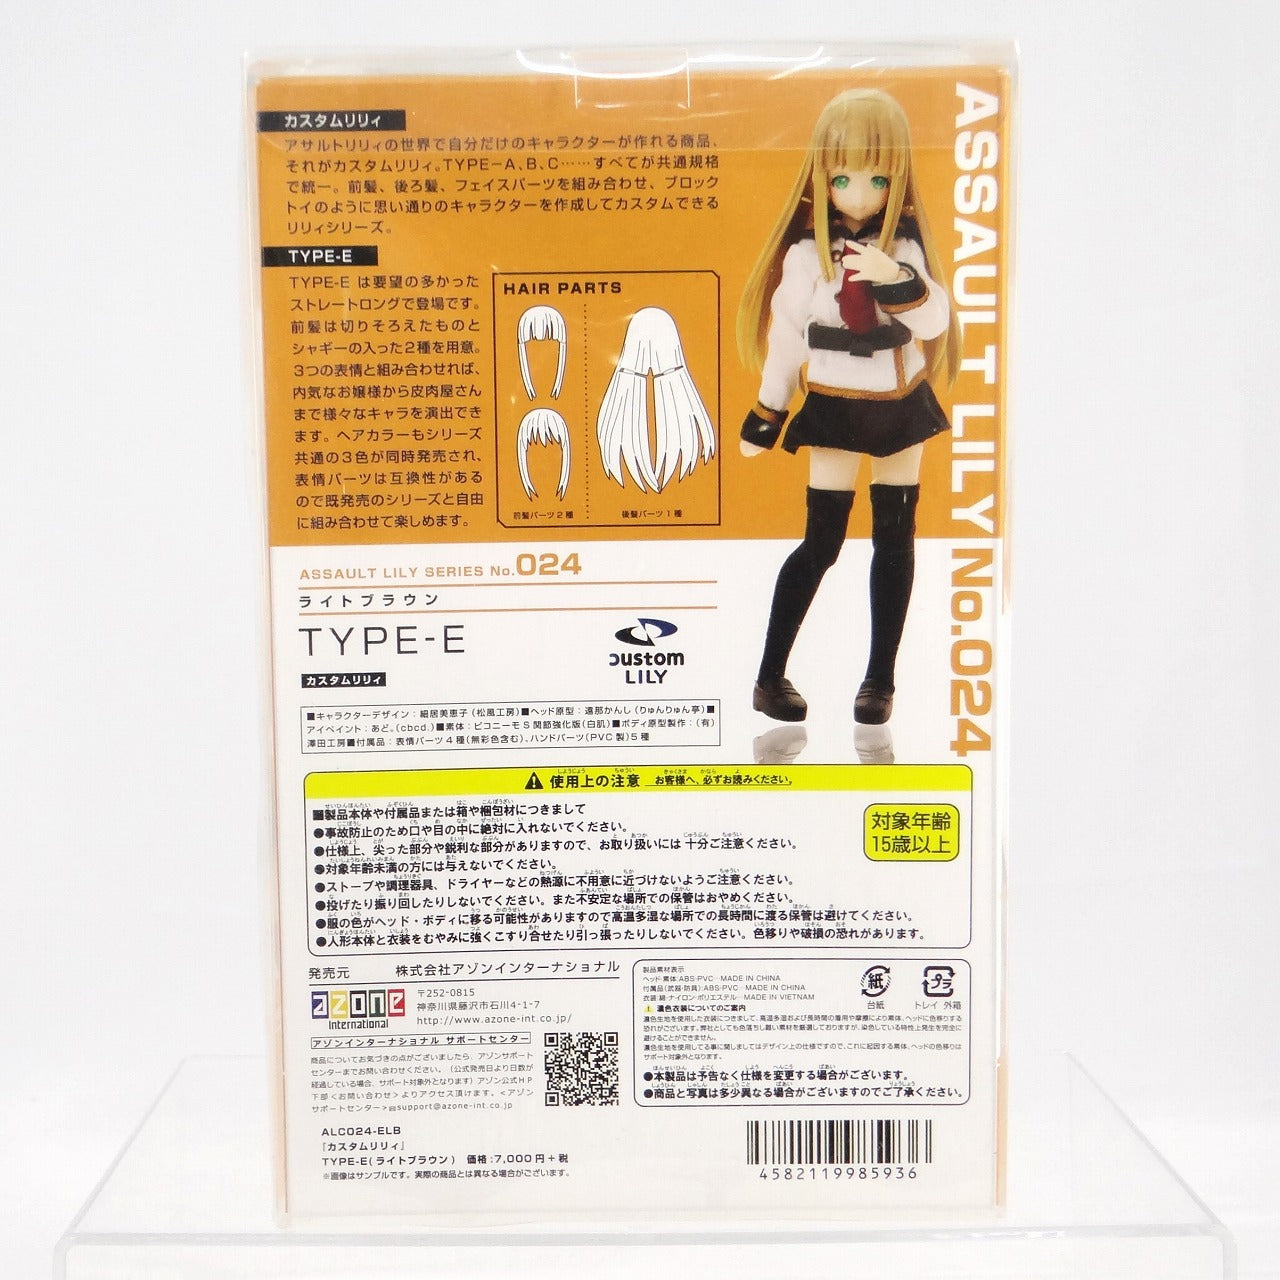 Azone 1/12 Assault Lily Series No.024 Custom Lily Type-E (Hair: Light Brown)